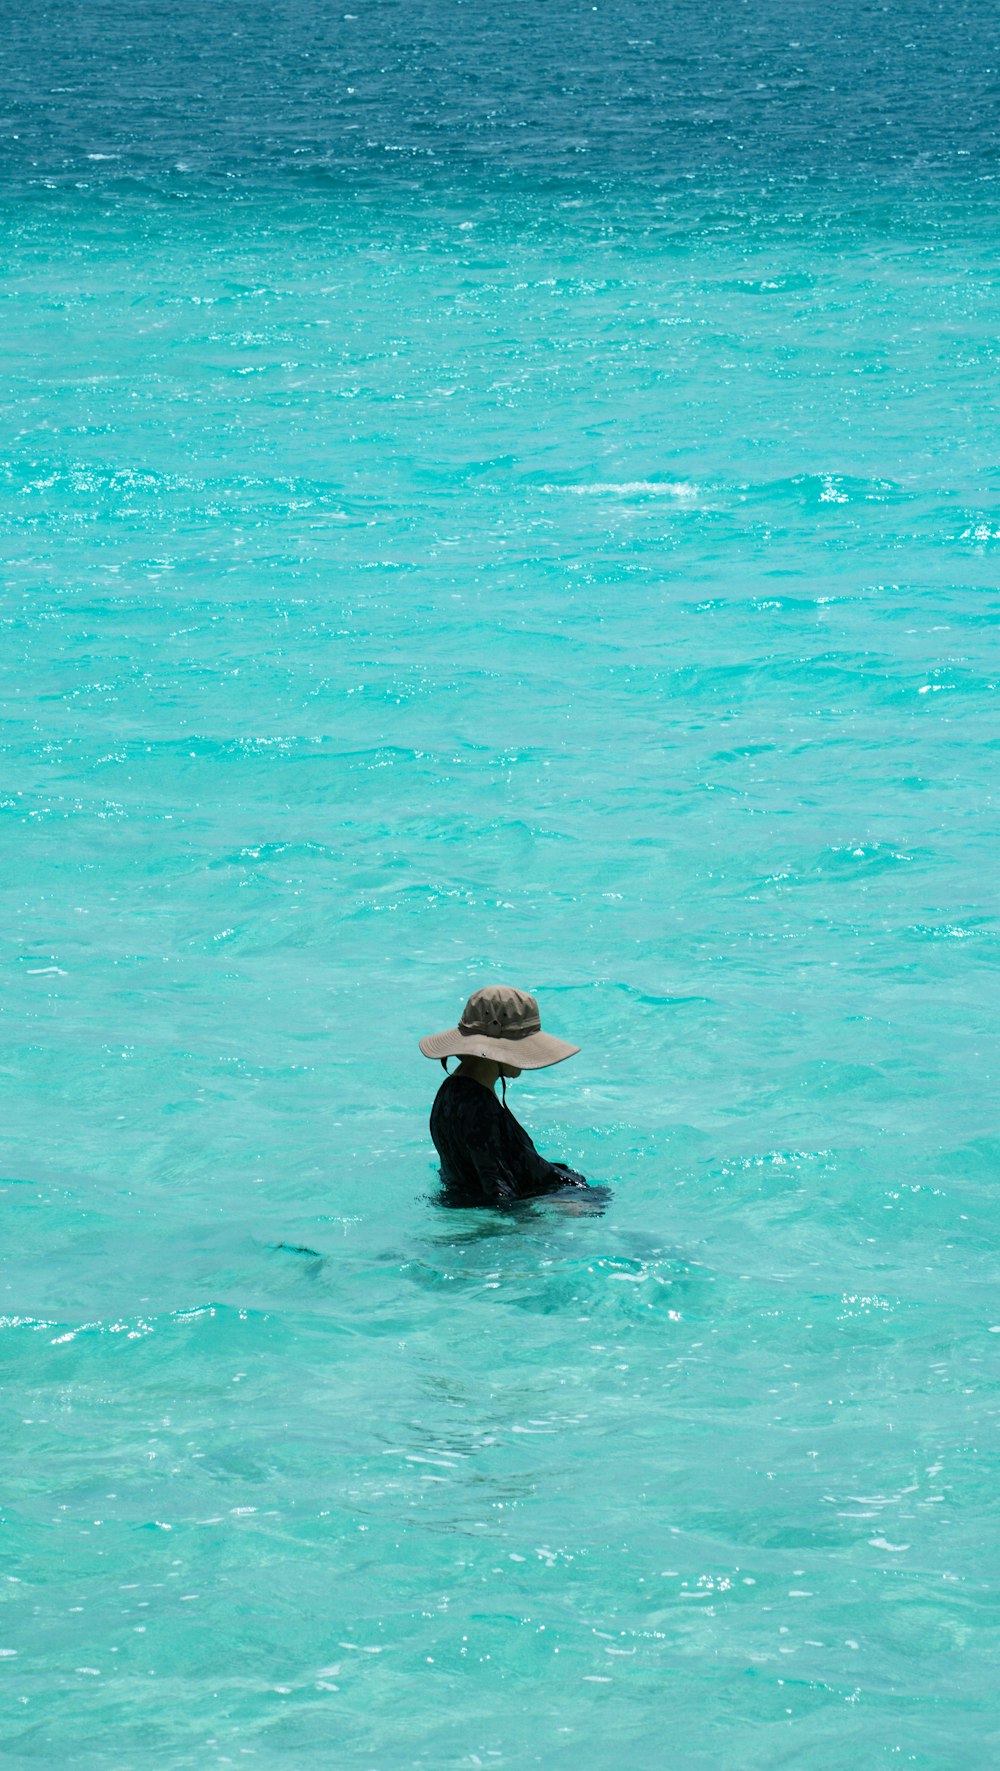 a person in the water wearing a hat